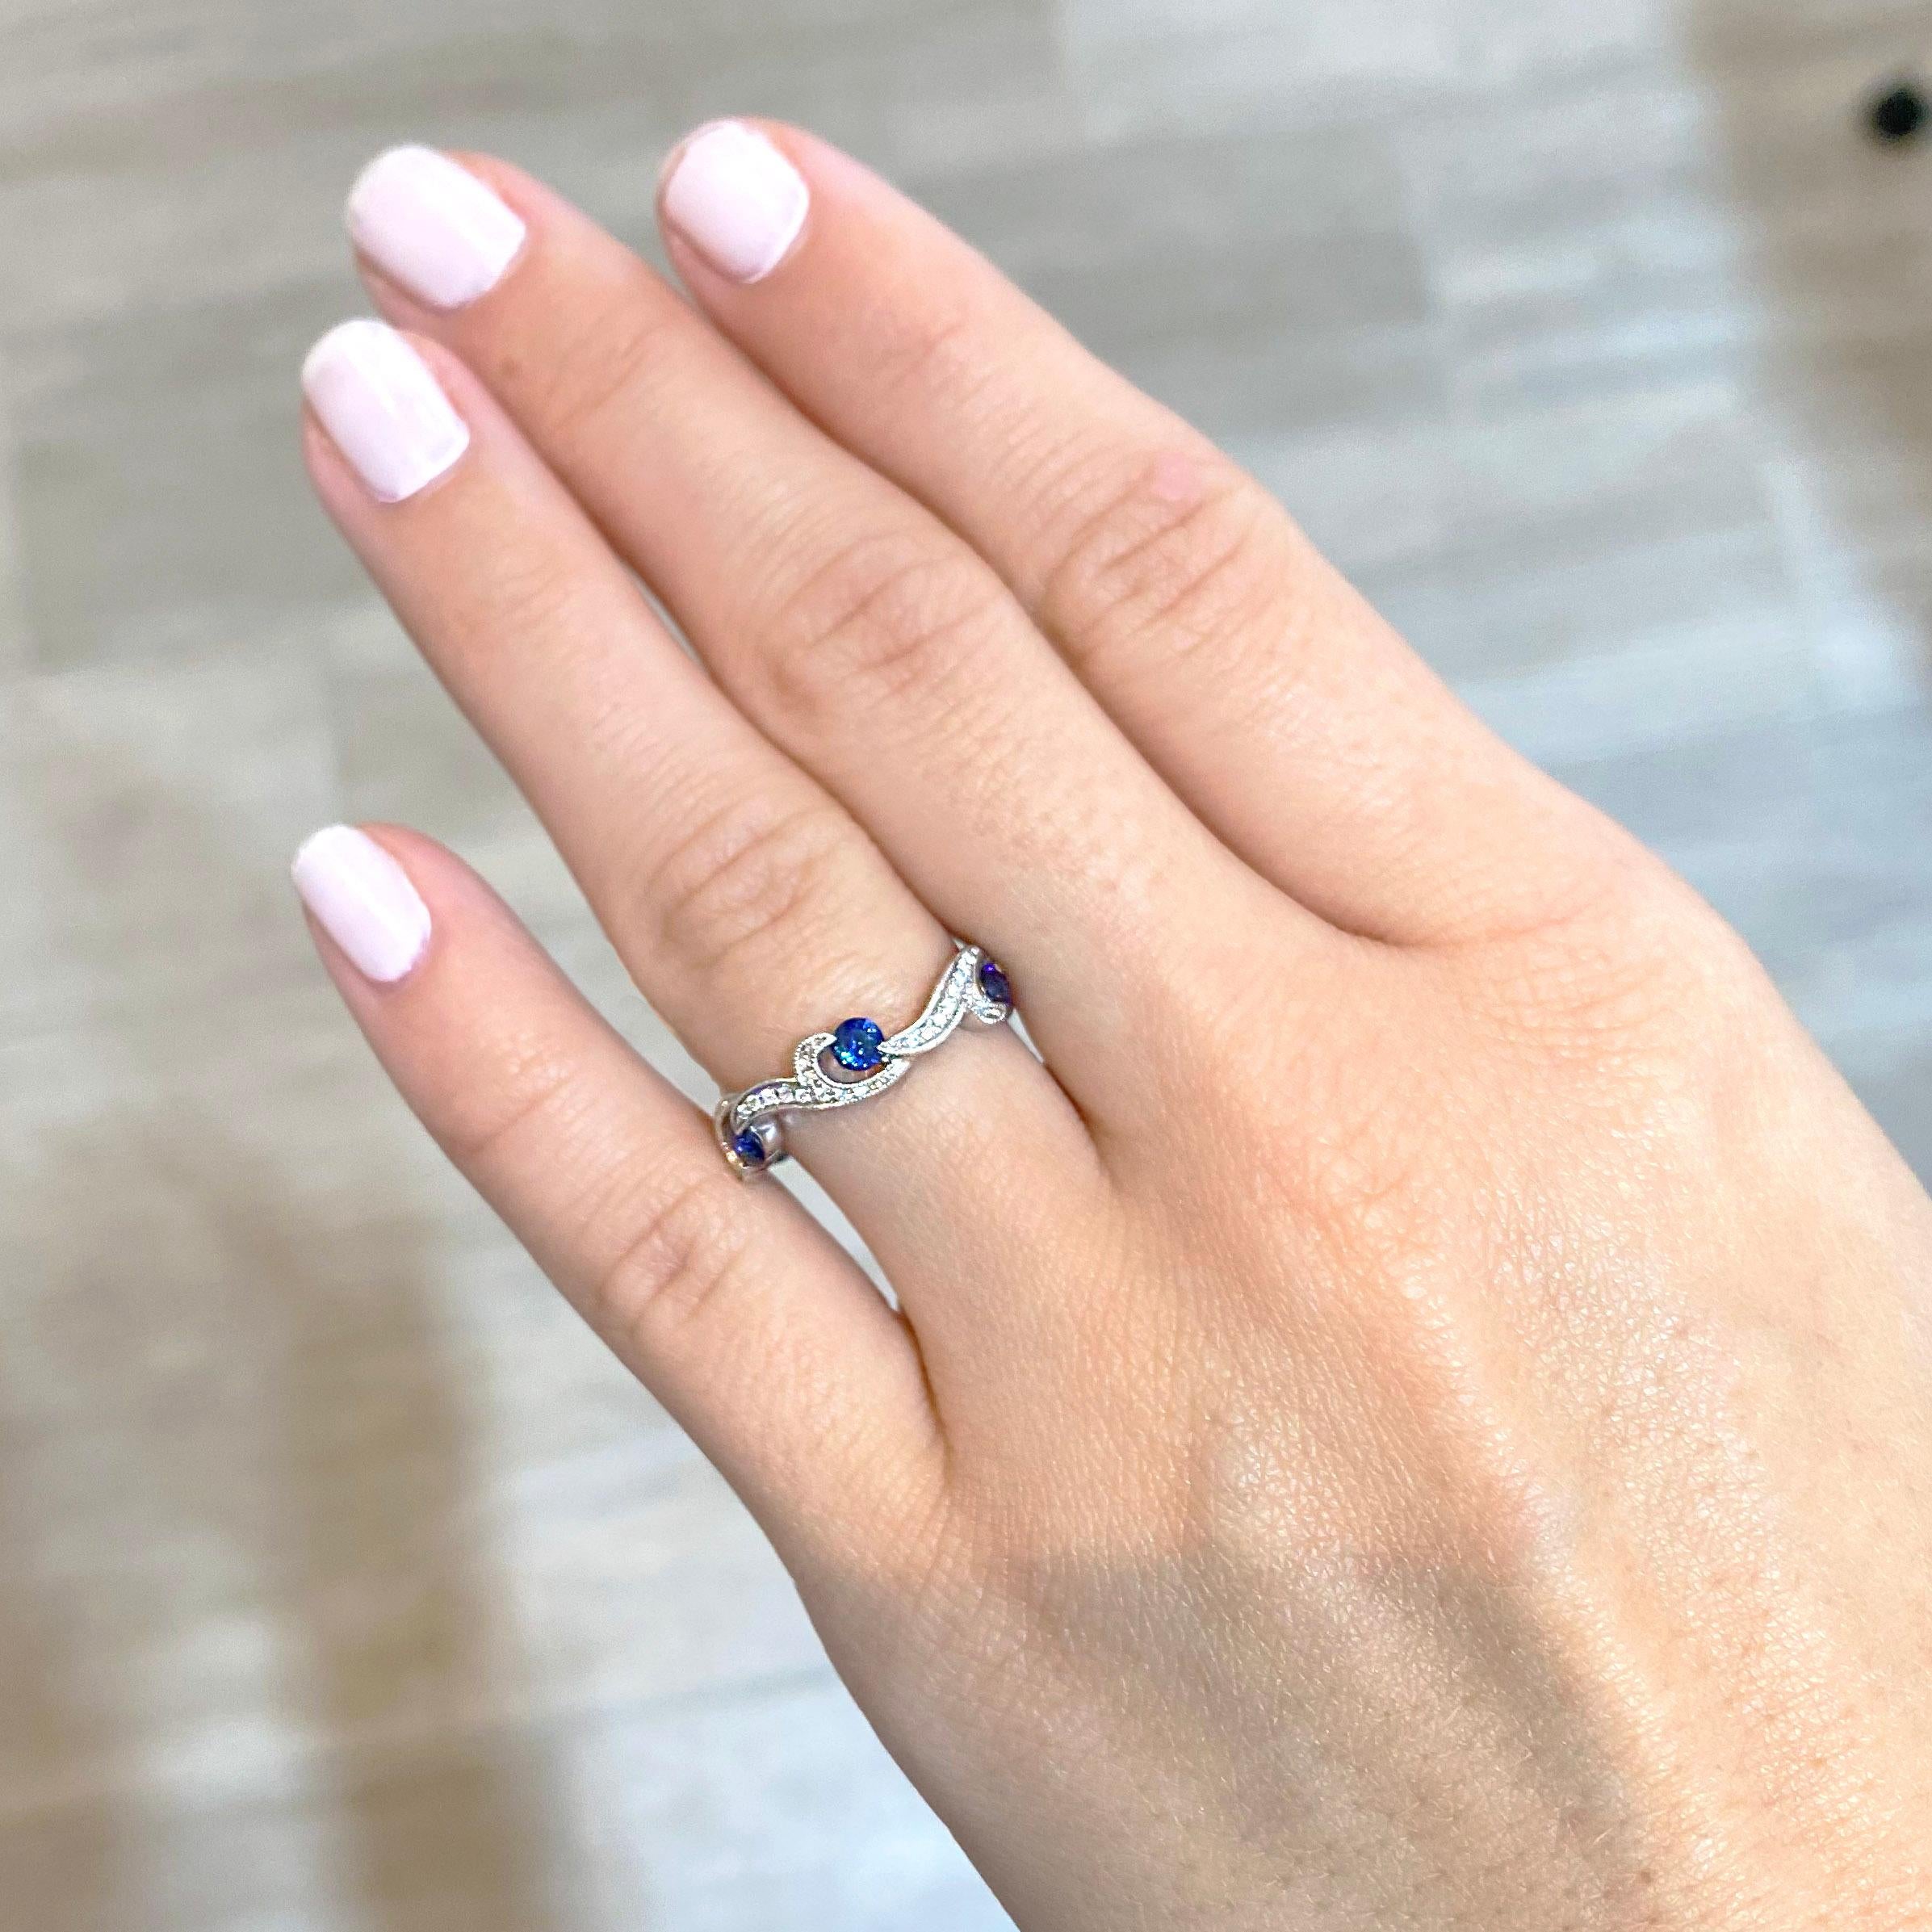 This swirl sapphire and diamond ring in bright 14 karat white gold is beautiful! The genuine, natural gemstones go 3/4 the way around eternity. This ring can be ordered in any ring size and in 14k yellow or rose gold.
The details for this beautiful